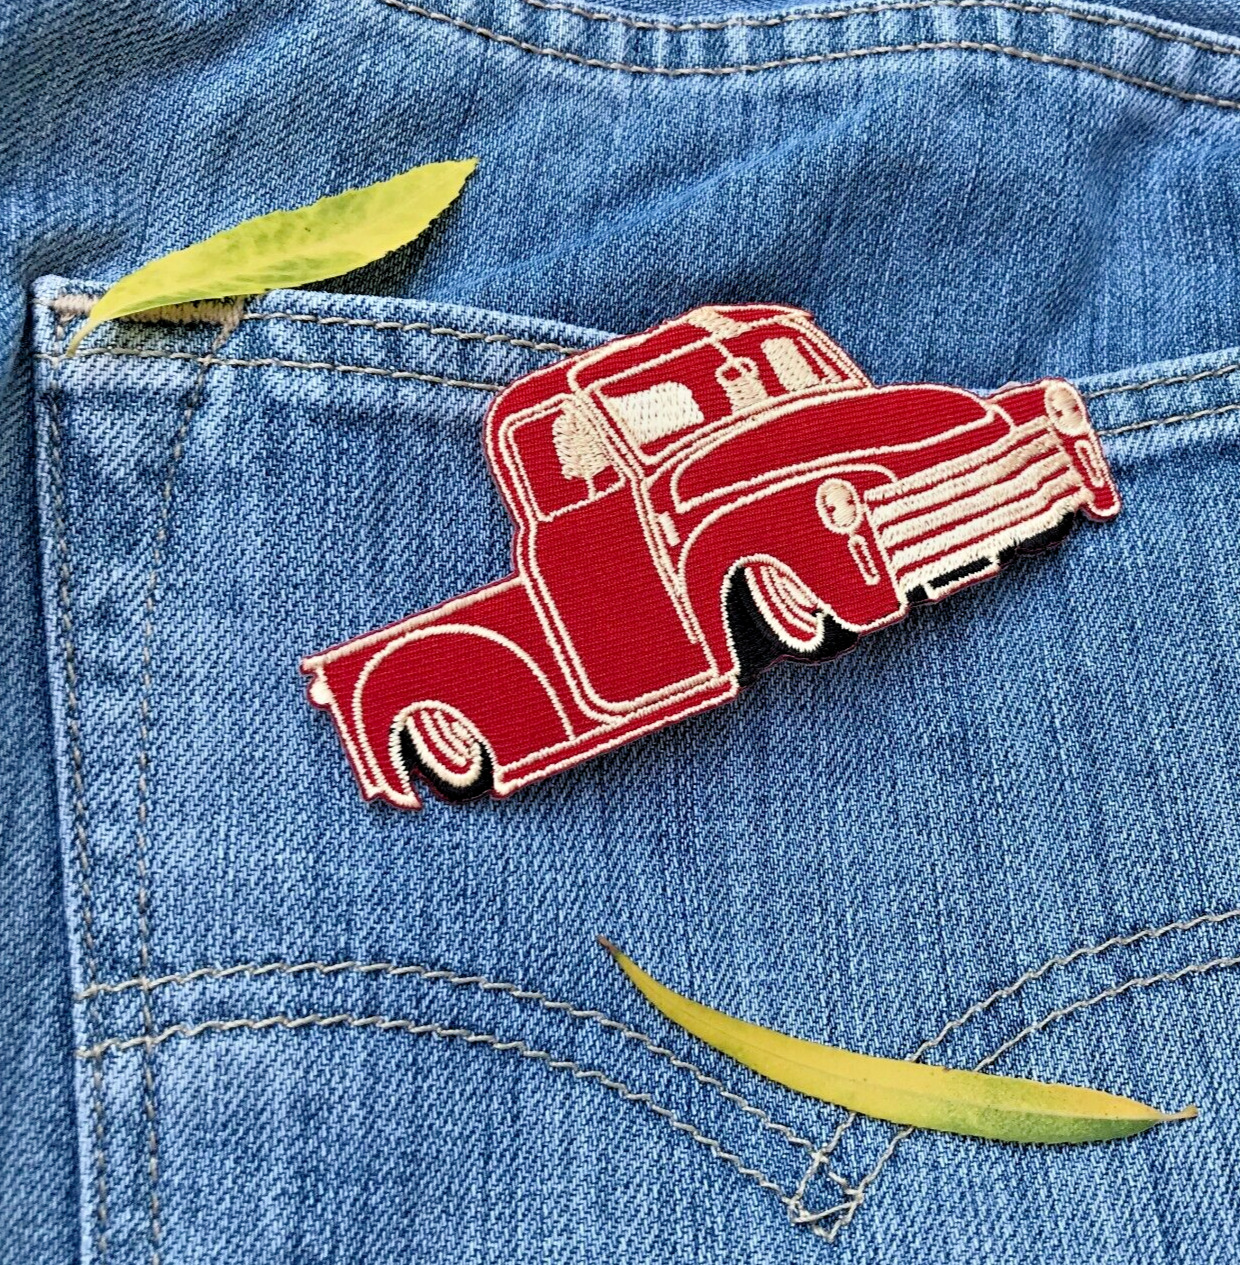 Vintage Old Red 1953 Chevy Truck Auto Embroidered Patches Pickup Car Model Badge